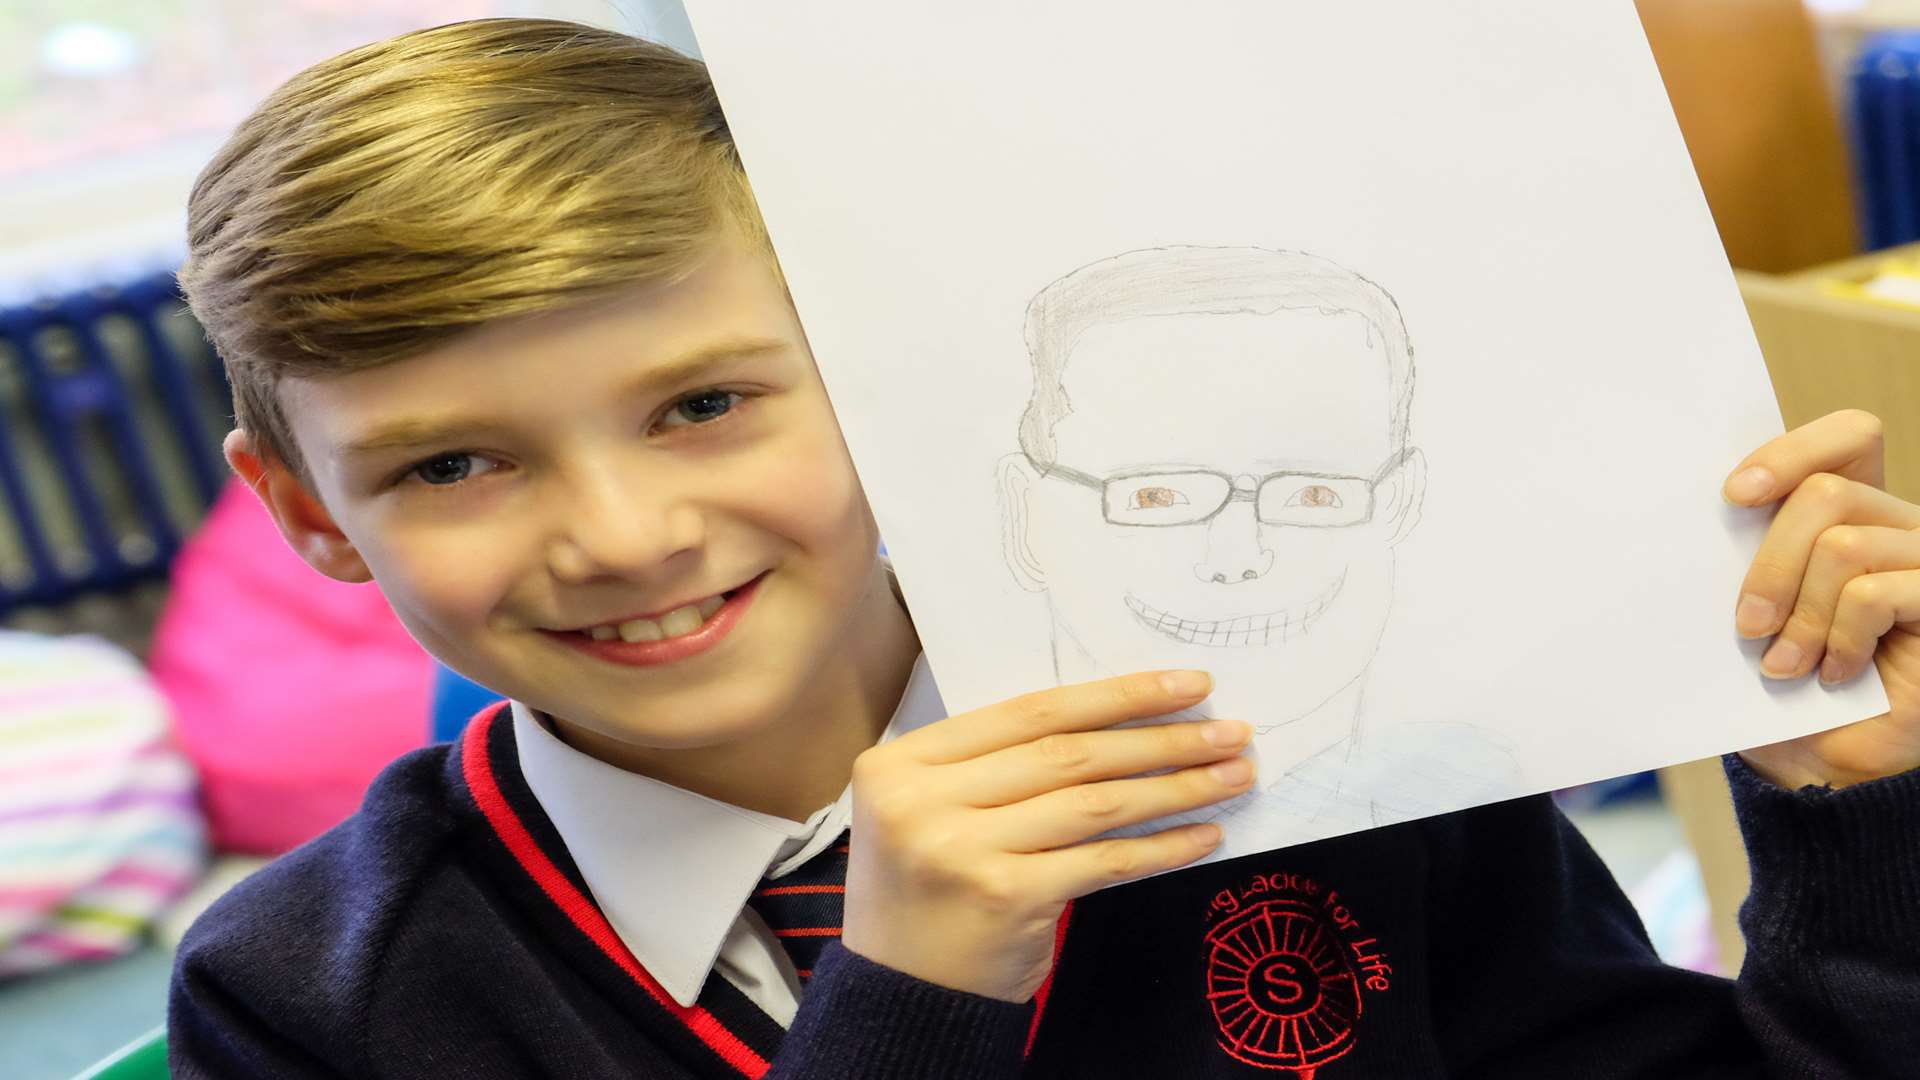 Political editor Paul Francis was the subject of Samuel's drawing